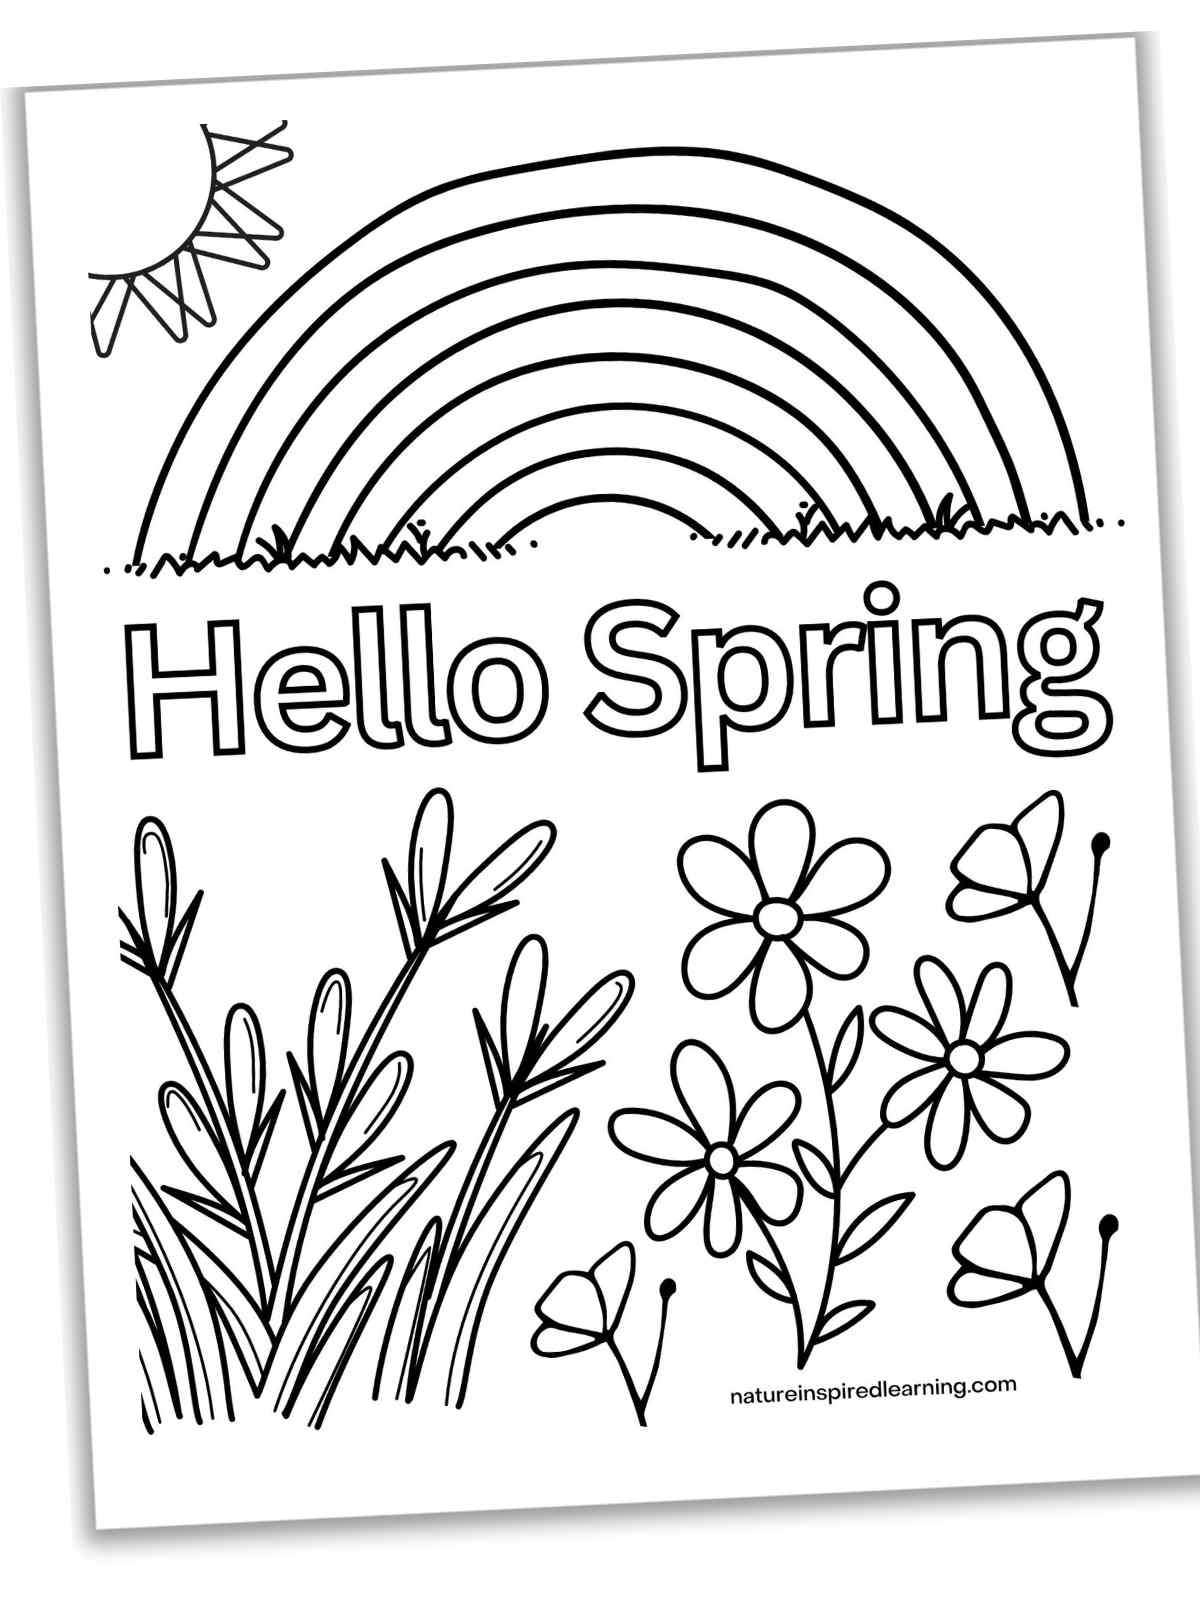 black and white printable with a large rainbow, sun, grass, Hello Spring in outline form, and a collection of spring blooming flowers.